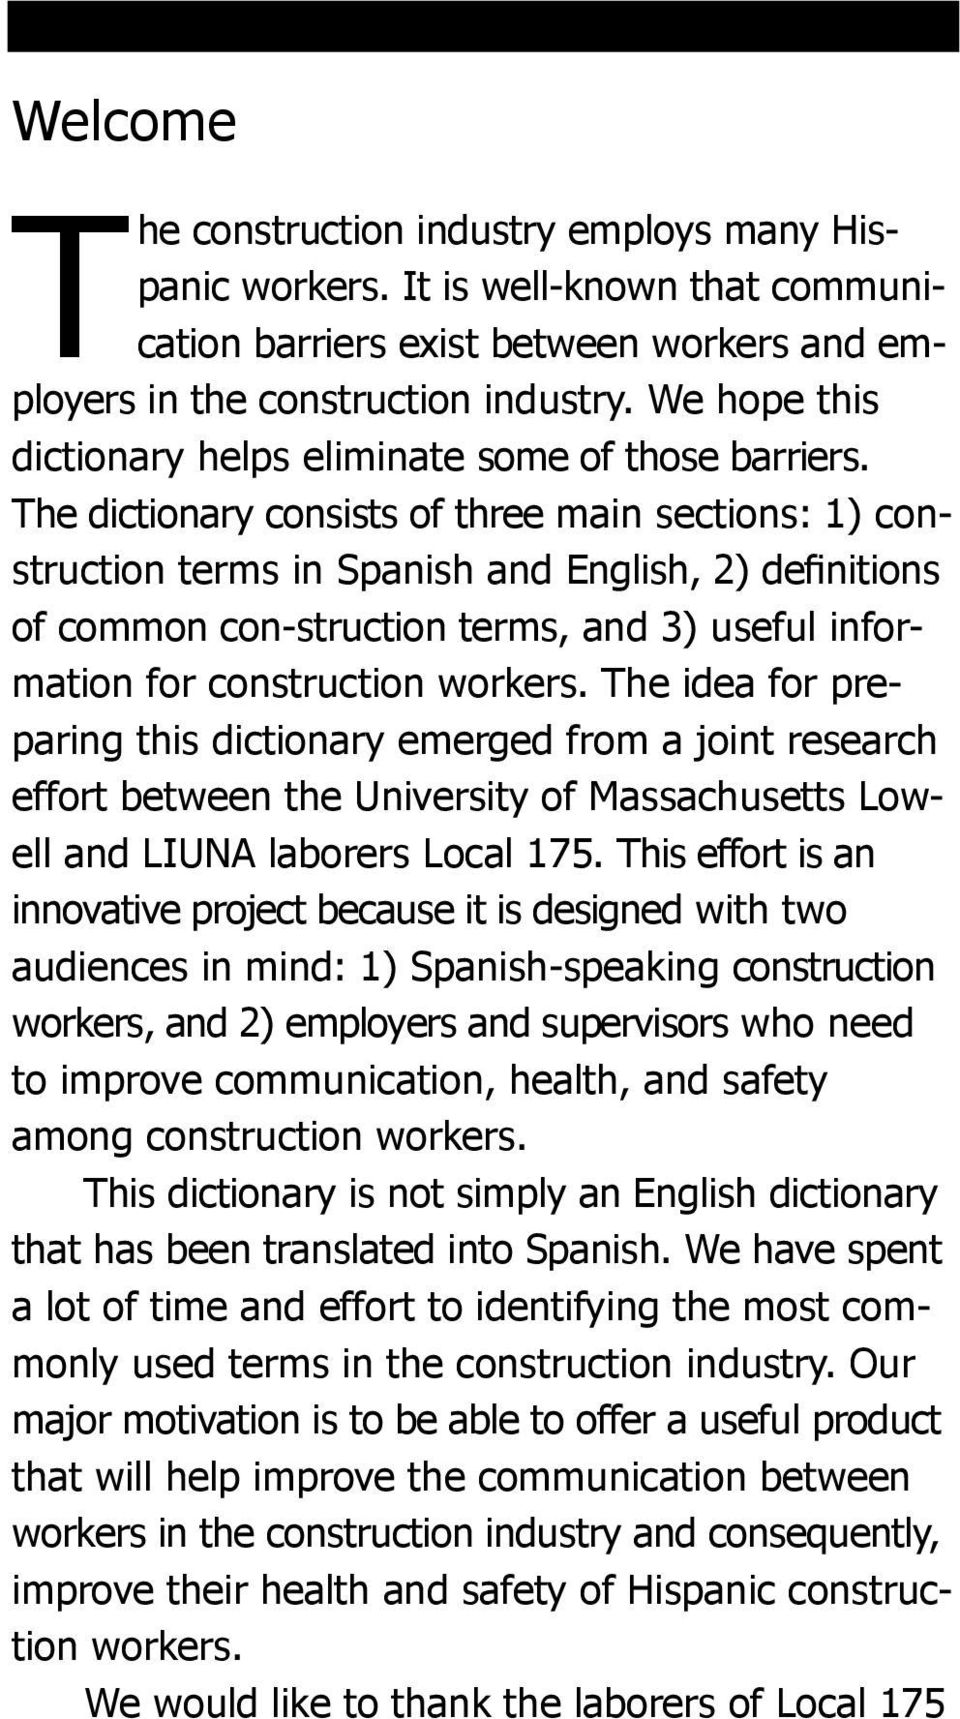 The dictionary consists of three main sections: 1) construction terms in Spanish and English, 2) definitions of common con-struction terms, and 3) useful information for construction workers.